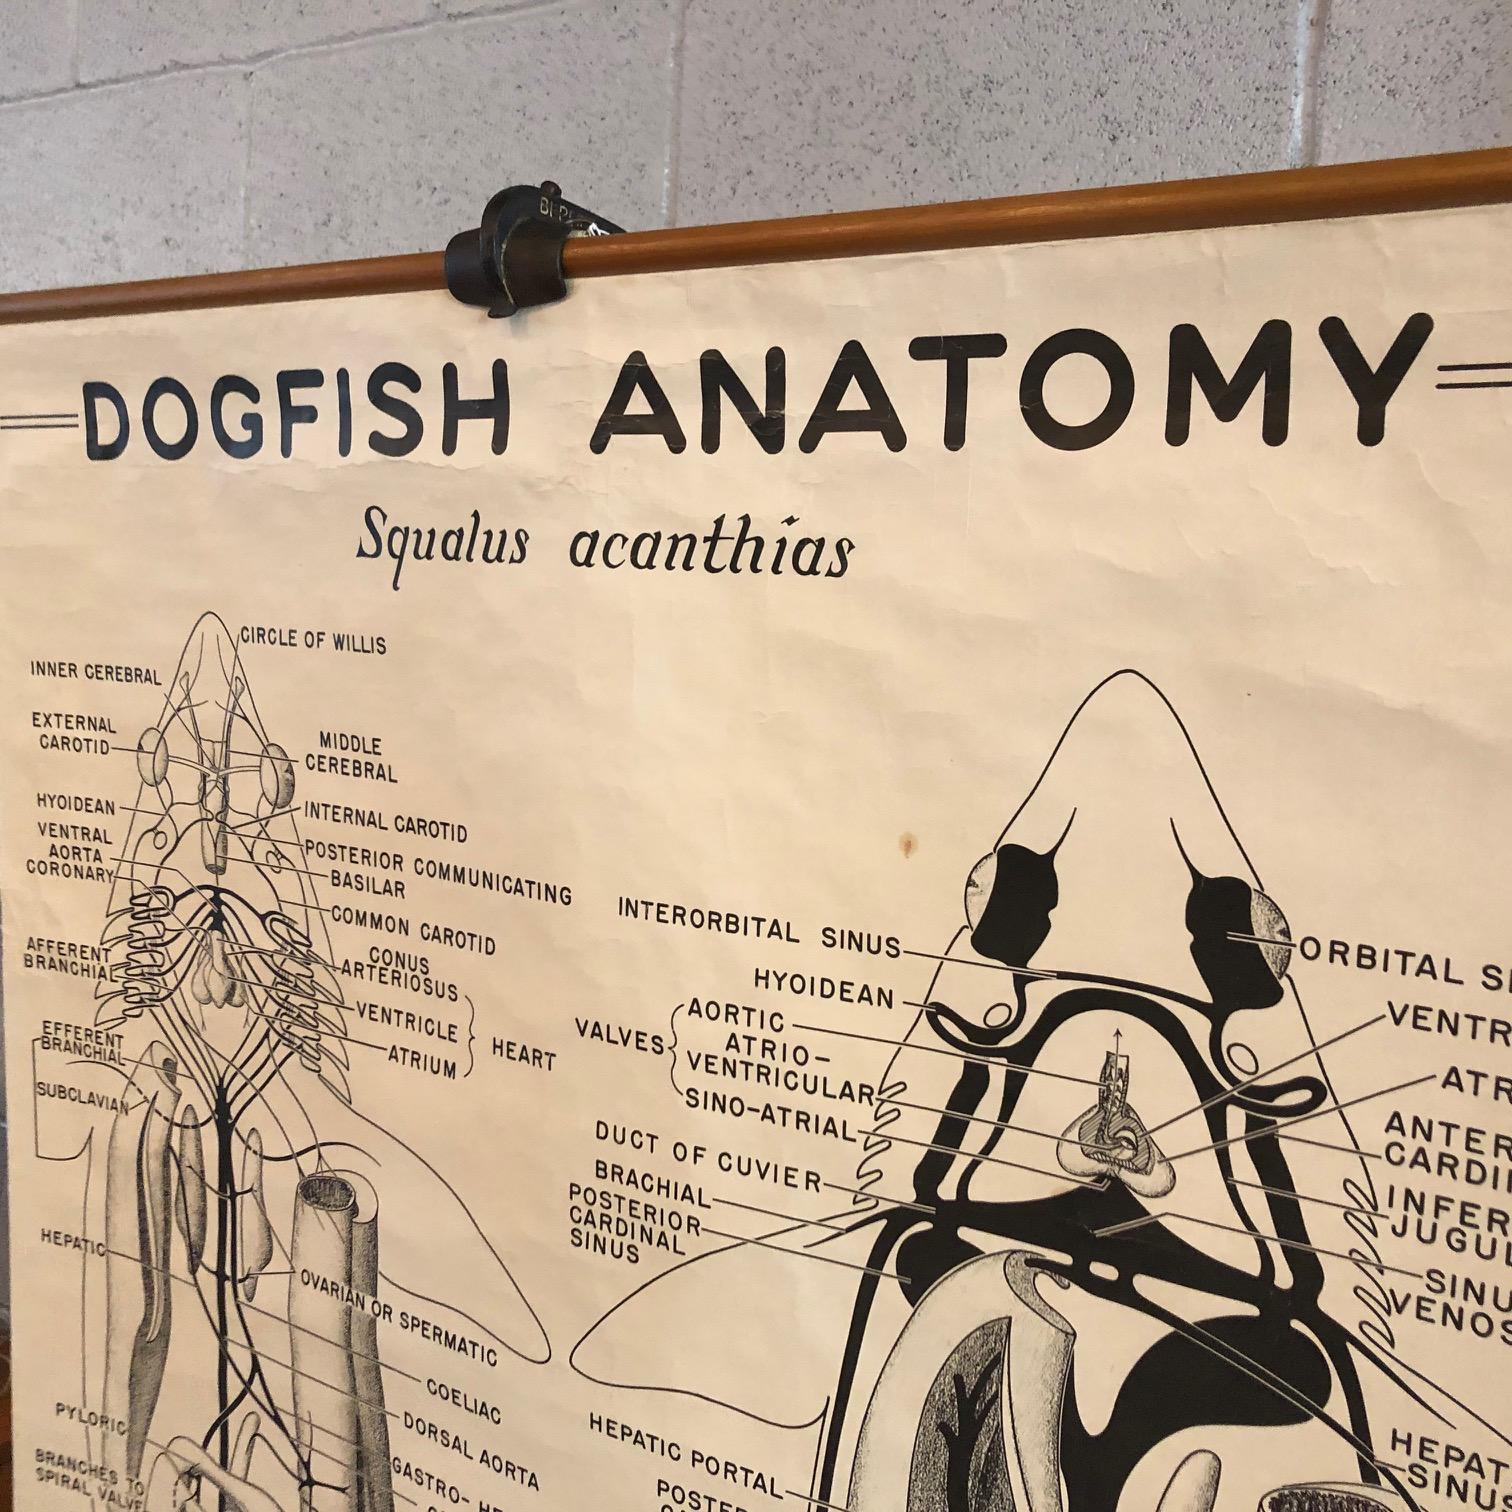 Industrial Educational Zoological Dogfish Anatomy Chart by New York Scientific Co. For Sale